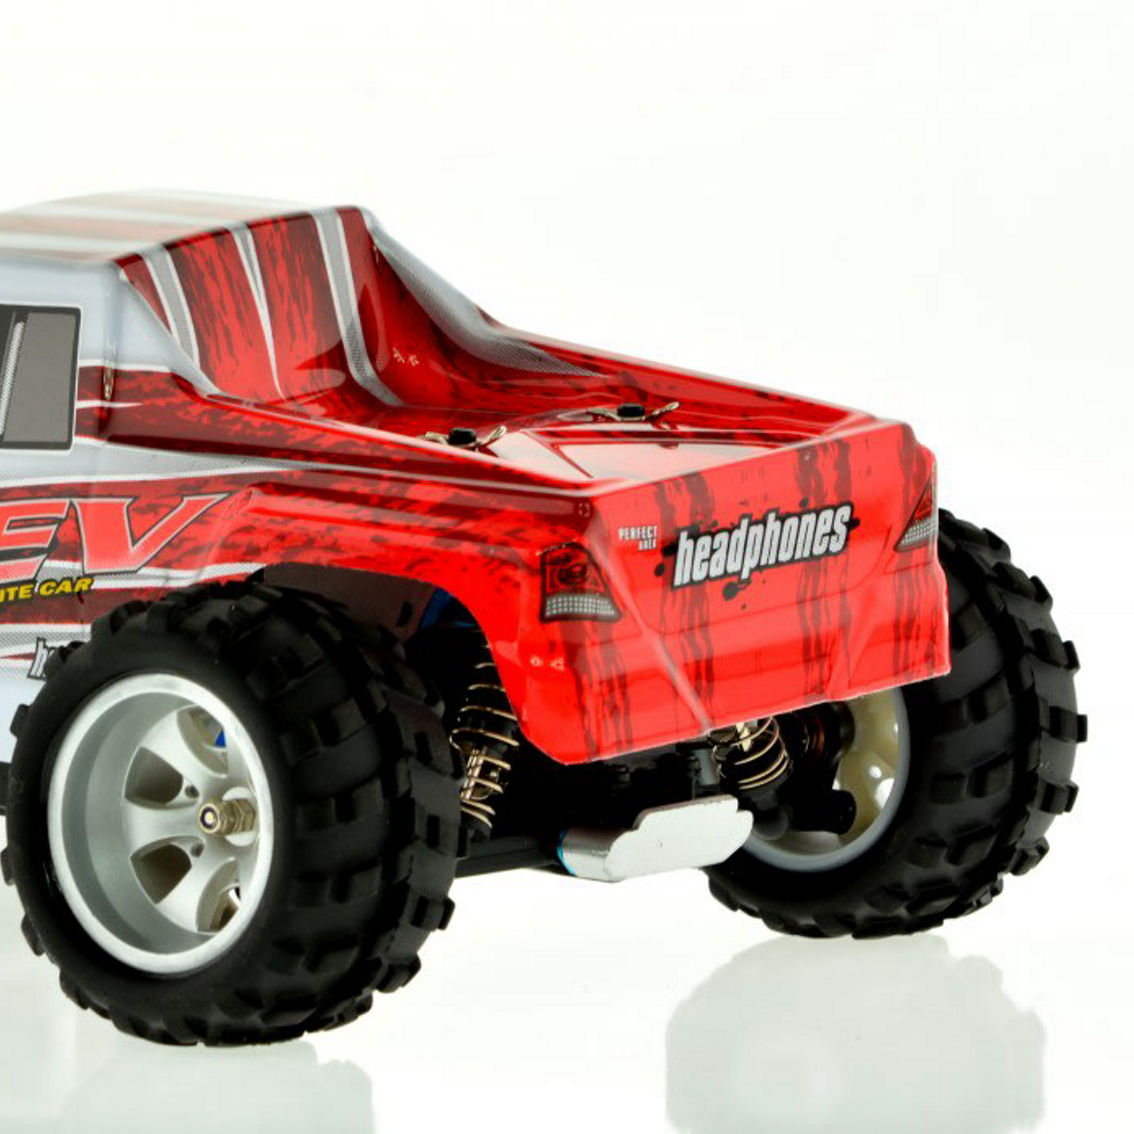 CIS-A979-B 1:16 scale monster truck with 450 feet range 45 MPH speed - Image 4 of 5